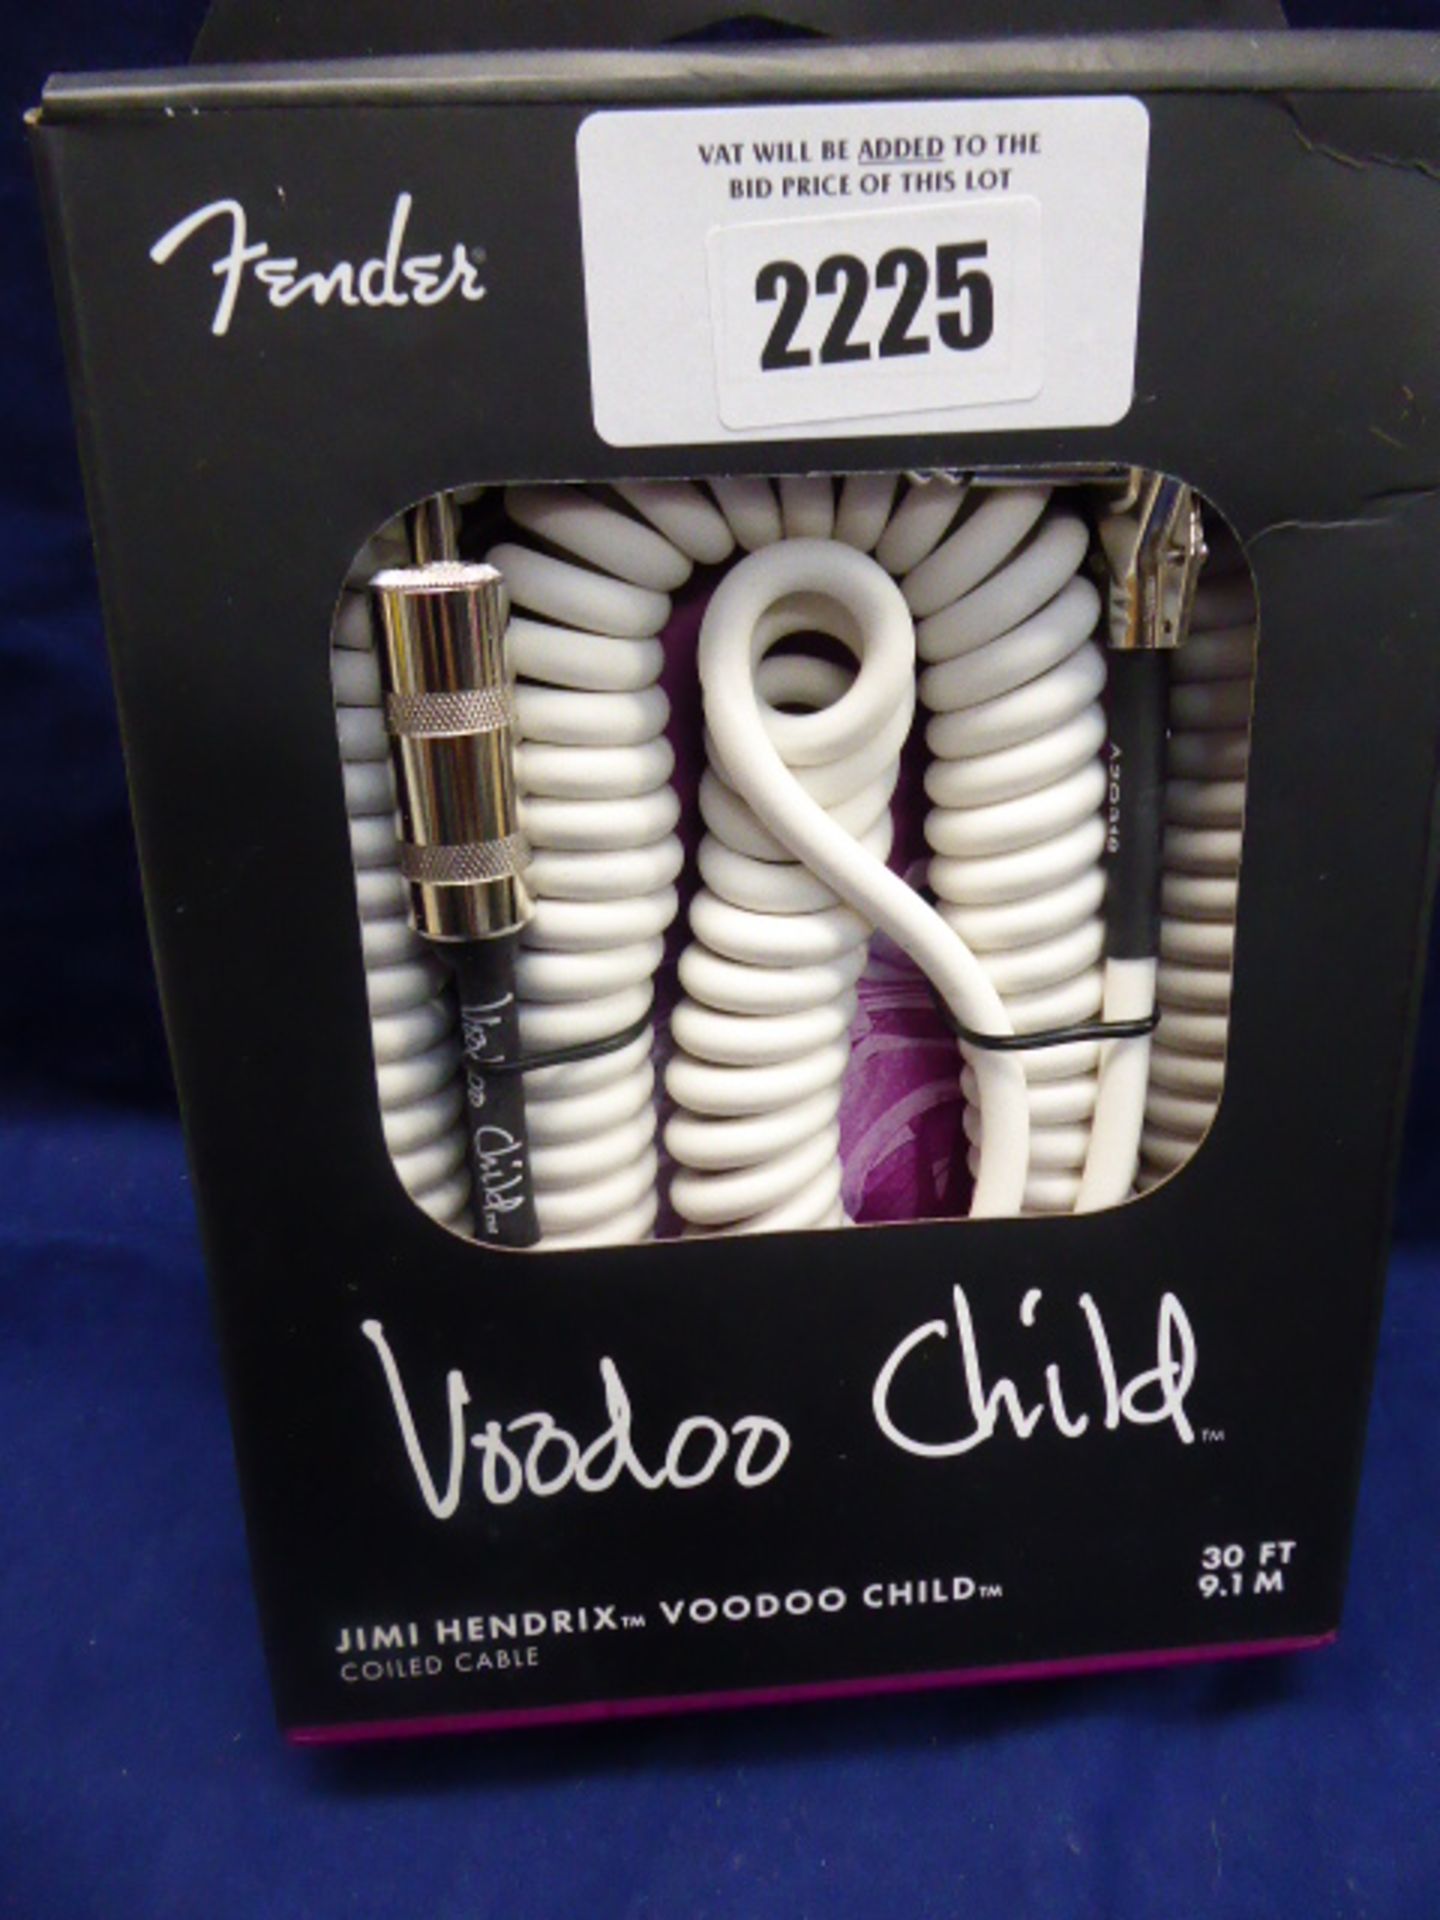 Fender Jimi Hendrix Voodoo Child 30ft. coiled cable